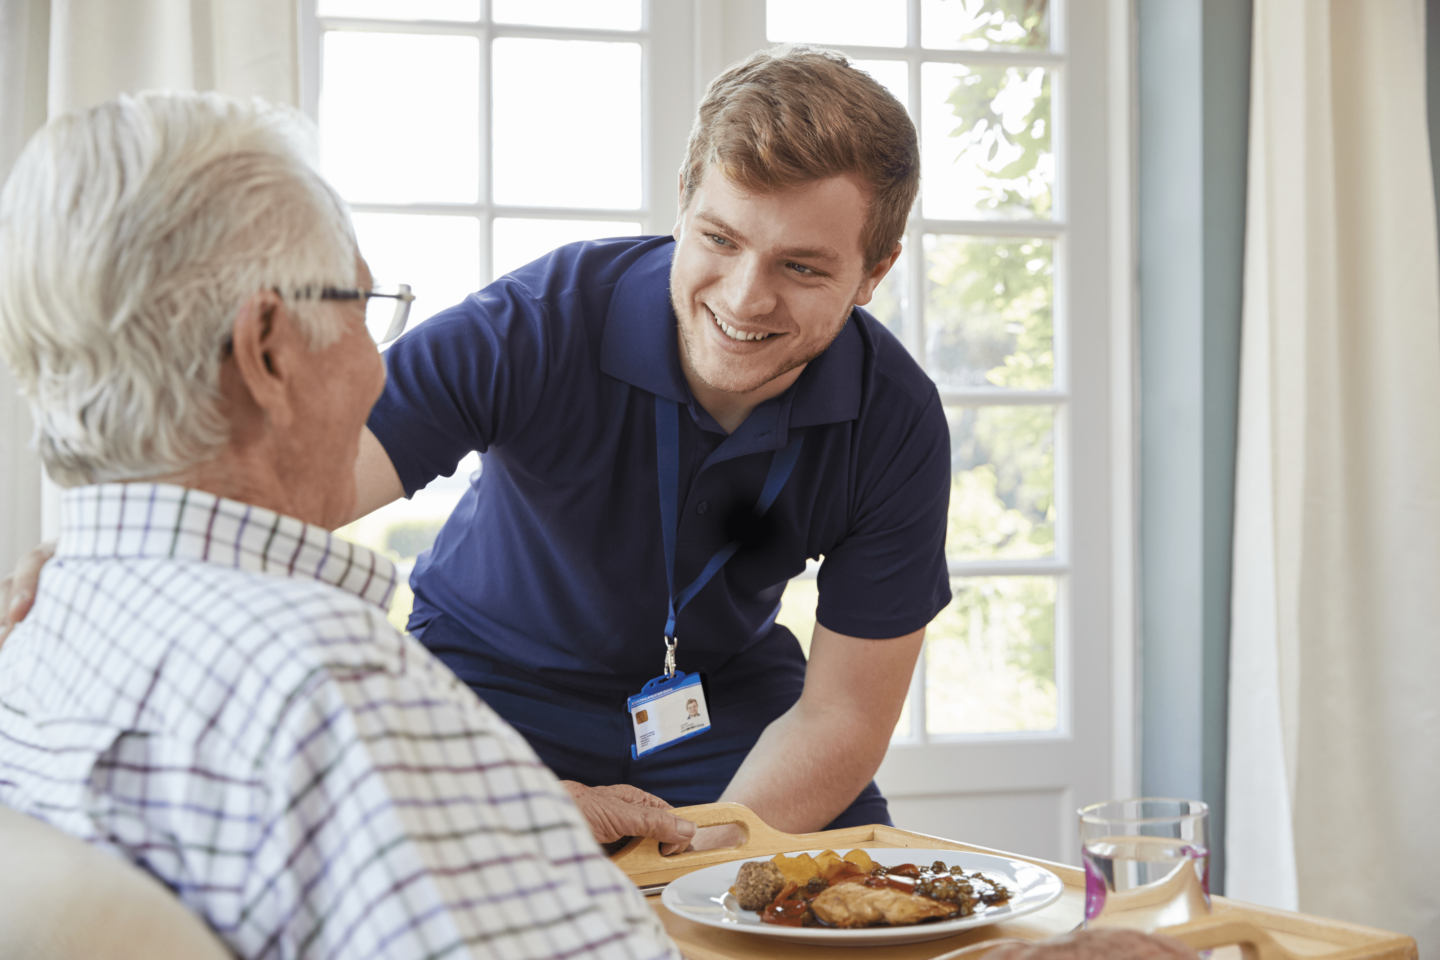 https://www.baywater.co.uk/app/uploads/2022/08/Male-care-worker-serving-dinner-to-a-senior-man-at-his-home-1440x960.png